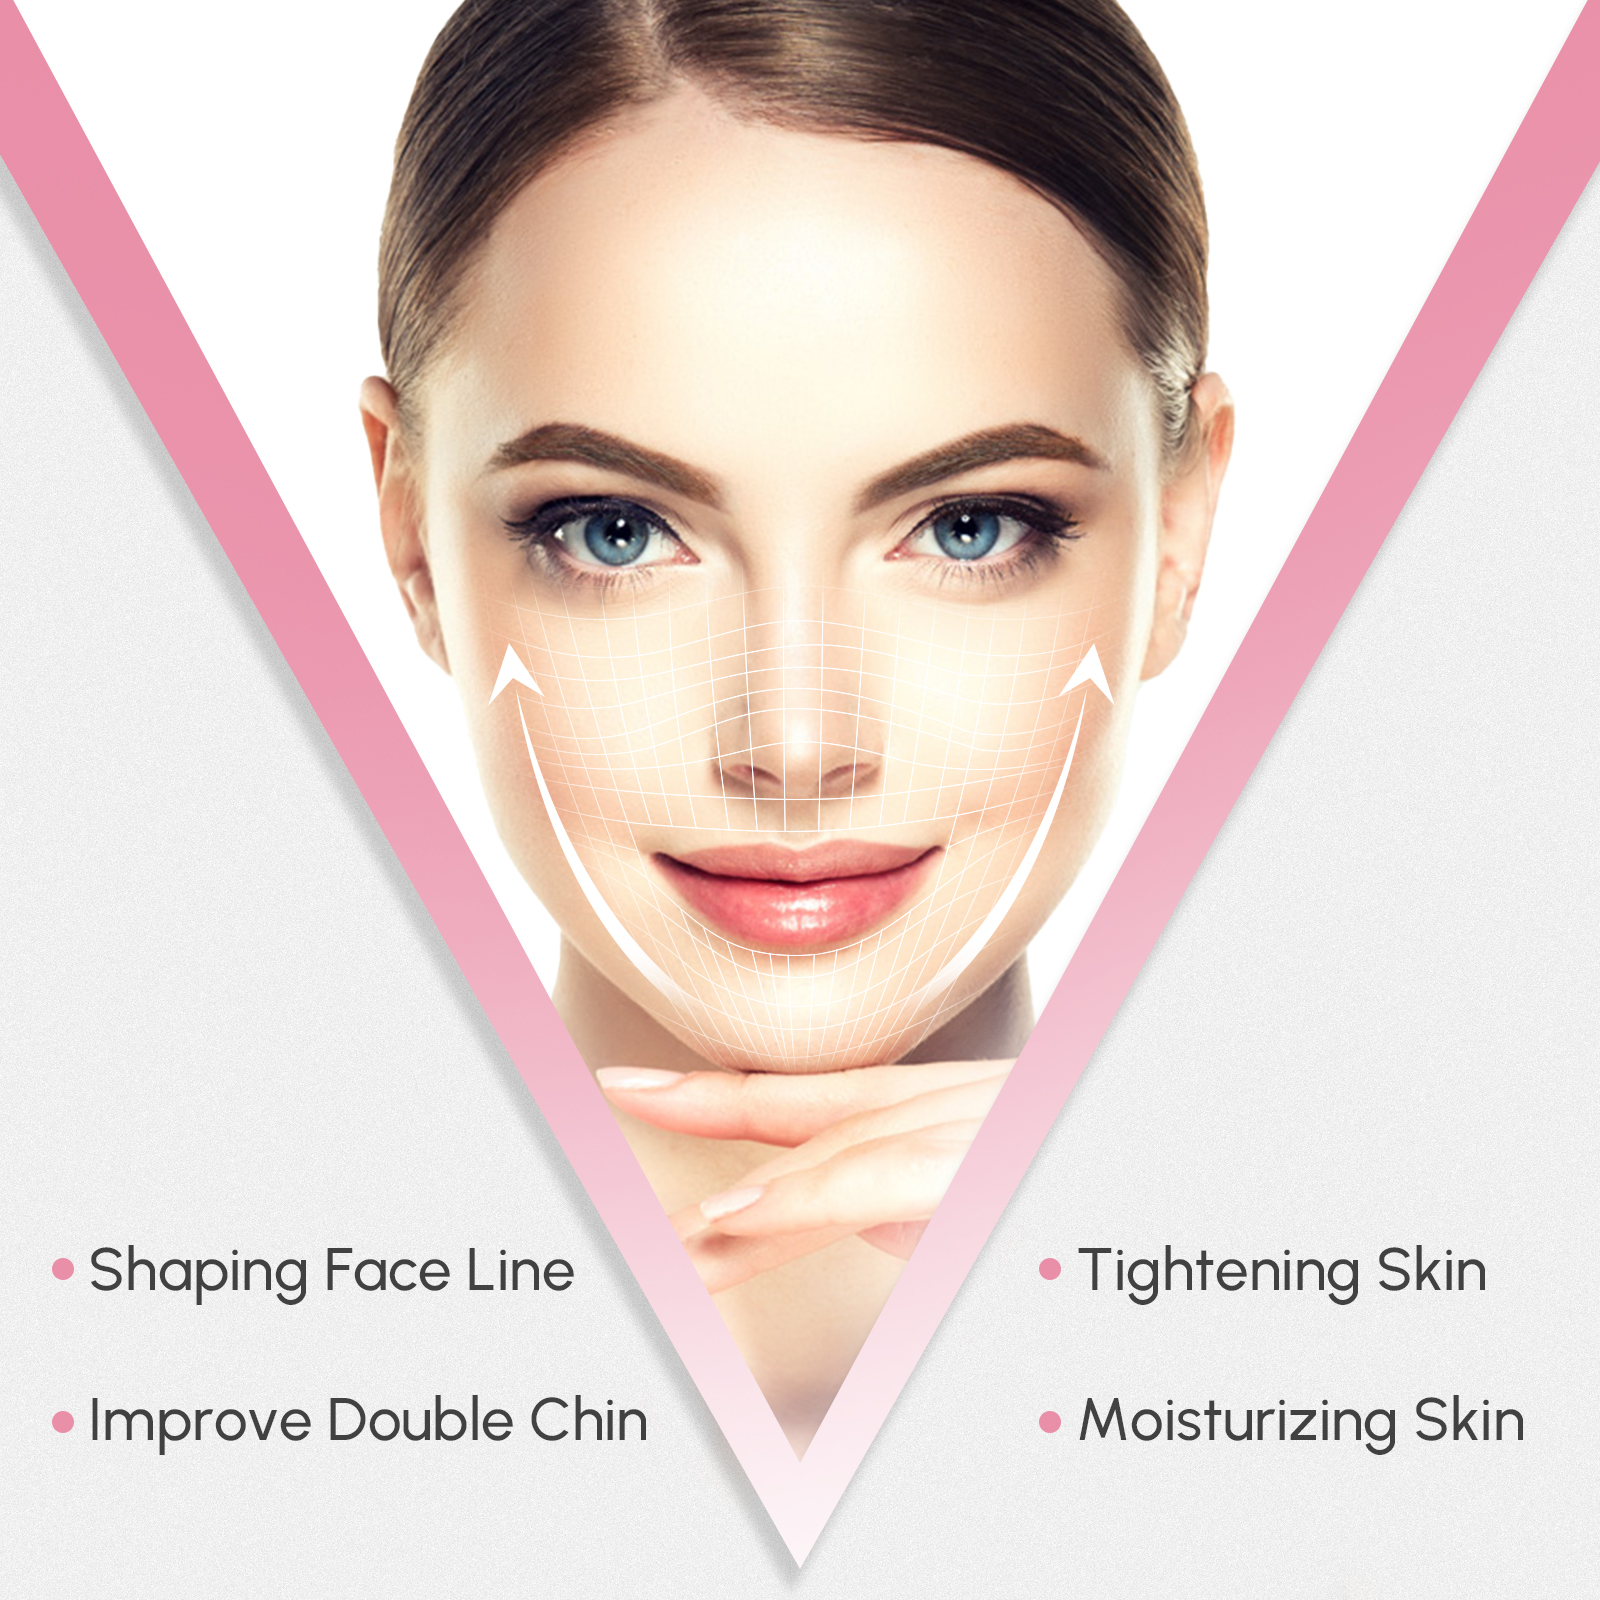 Saisze 5 Pcs V Shaped Facial Masks, V Line Chin Lift Patch, Chin Up Tightening Mask, Great for Chin Up & V Line, Double Chin Reduce, Firming Moisturizing & Contour Lifting - image 3 of 6